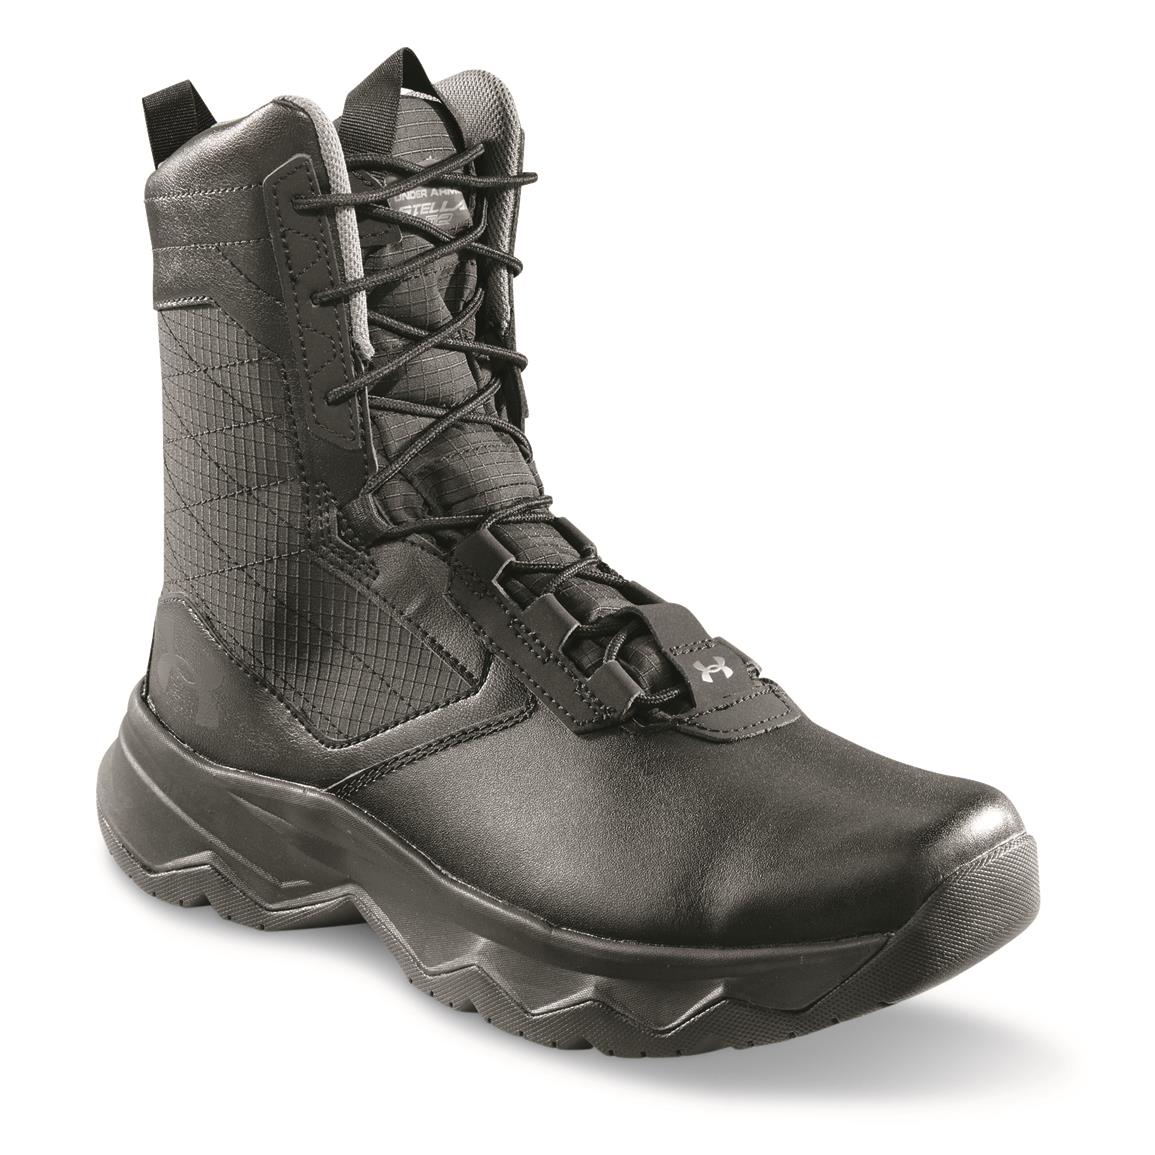 Under Armour Women's Stellar G2 Tactical Boots, Black/Black/Pitch Gray